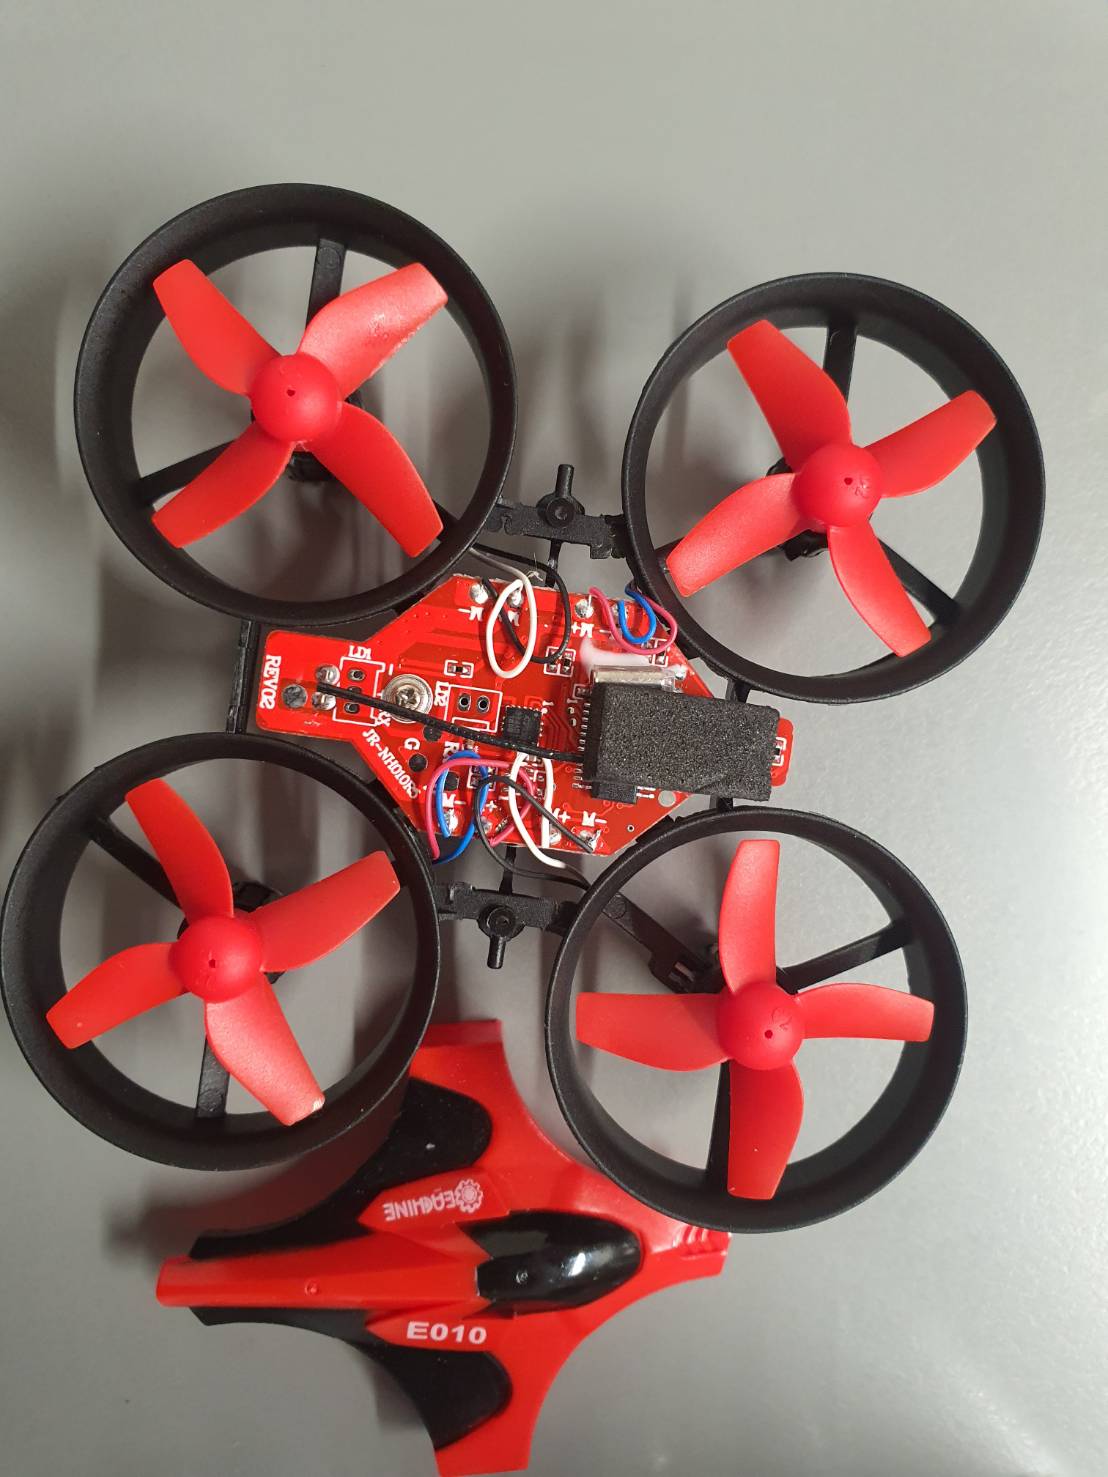 Drones to Kids - Which is the Best One?
